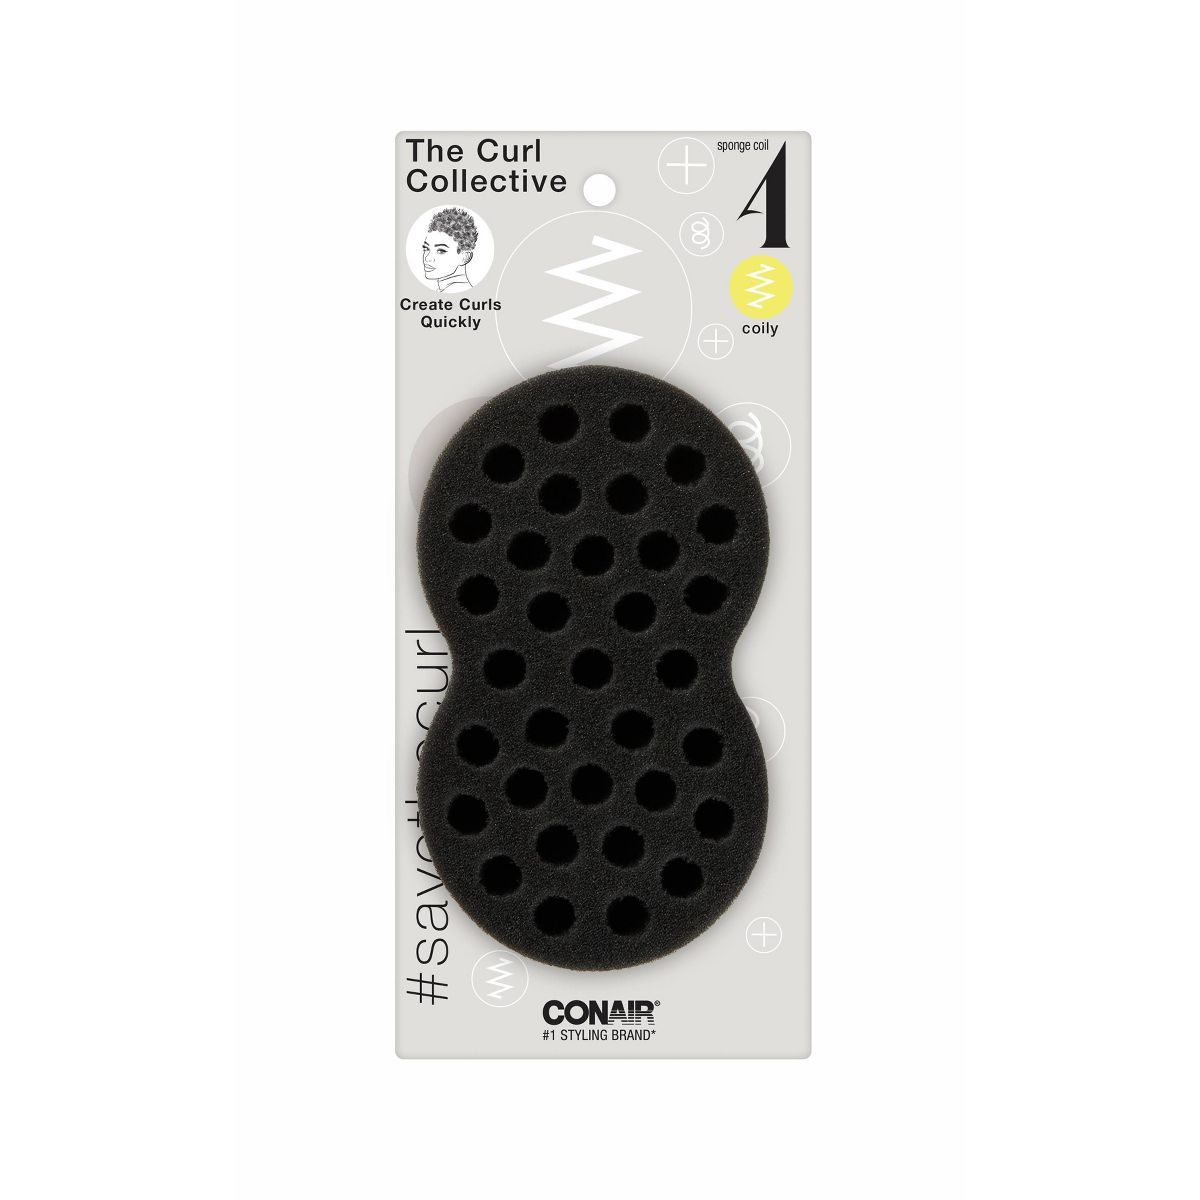 Conair Curl Collective Curl 4 Coily Sponge | Target